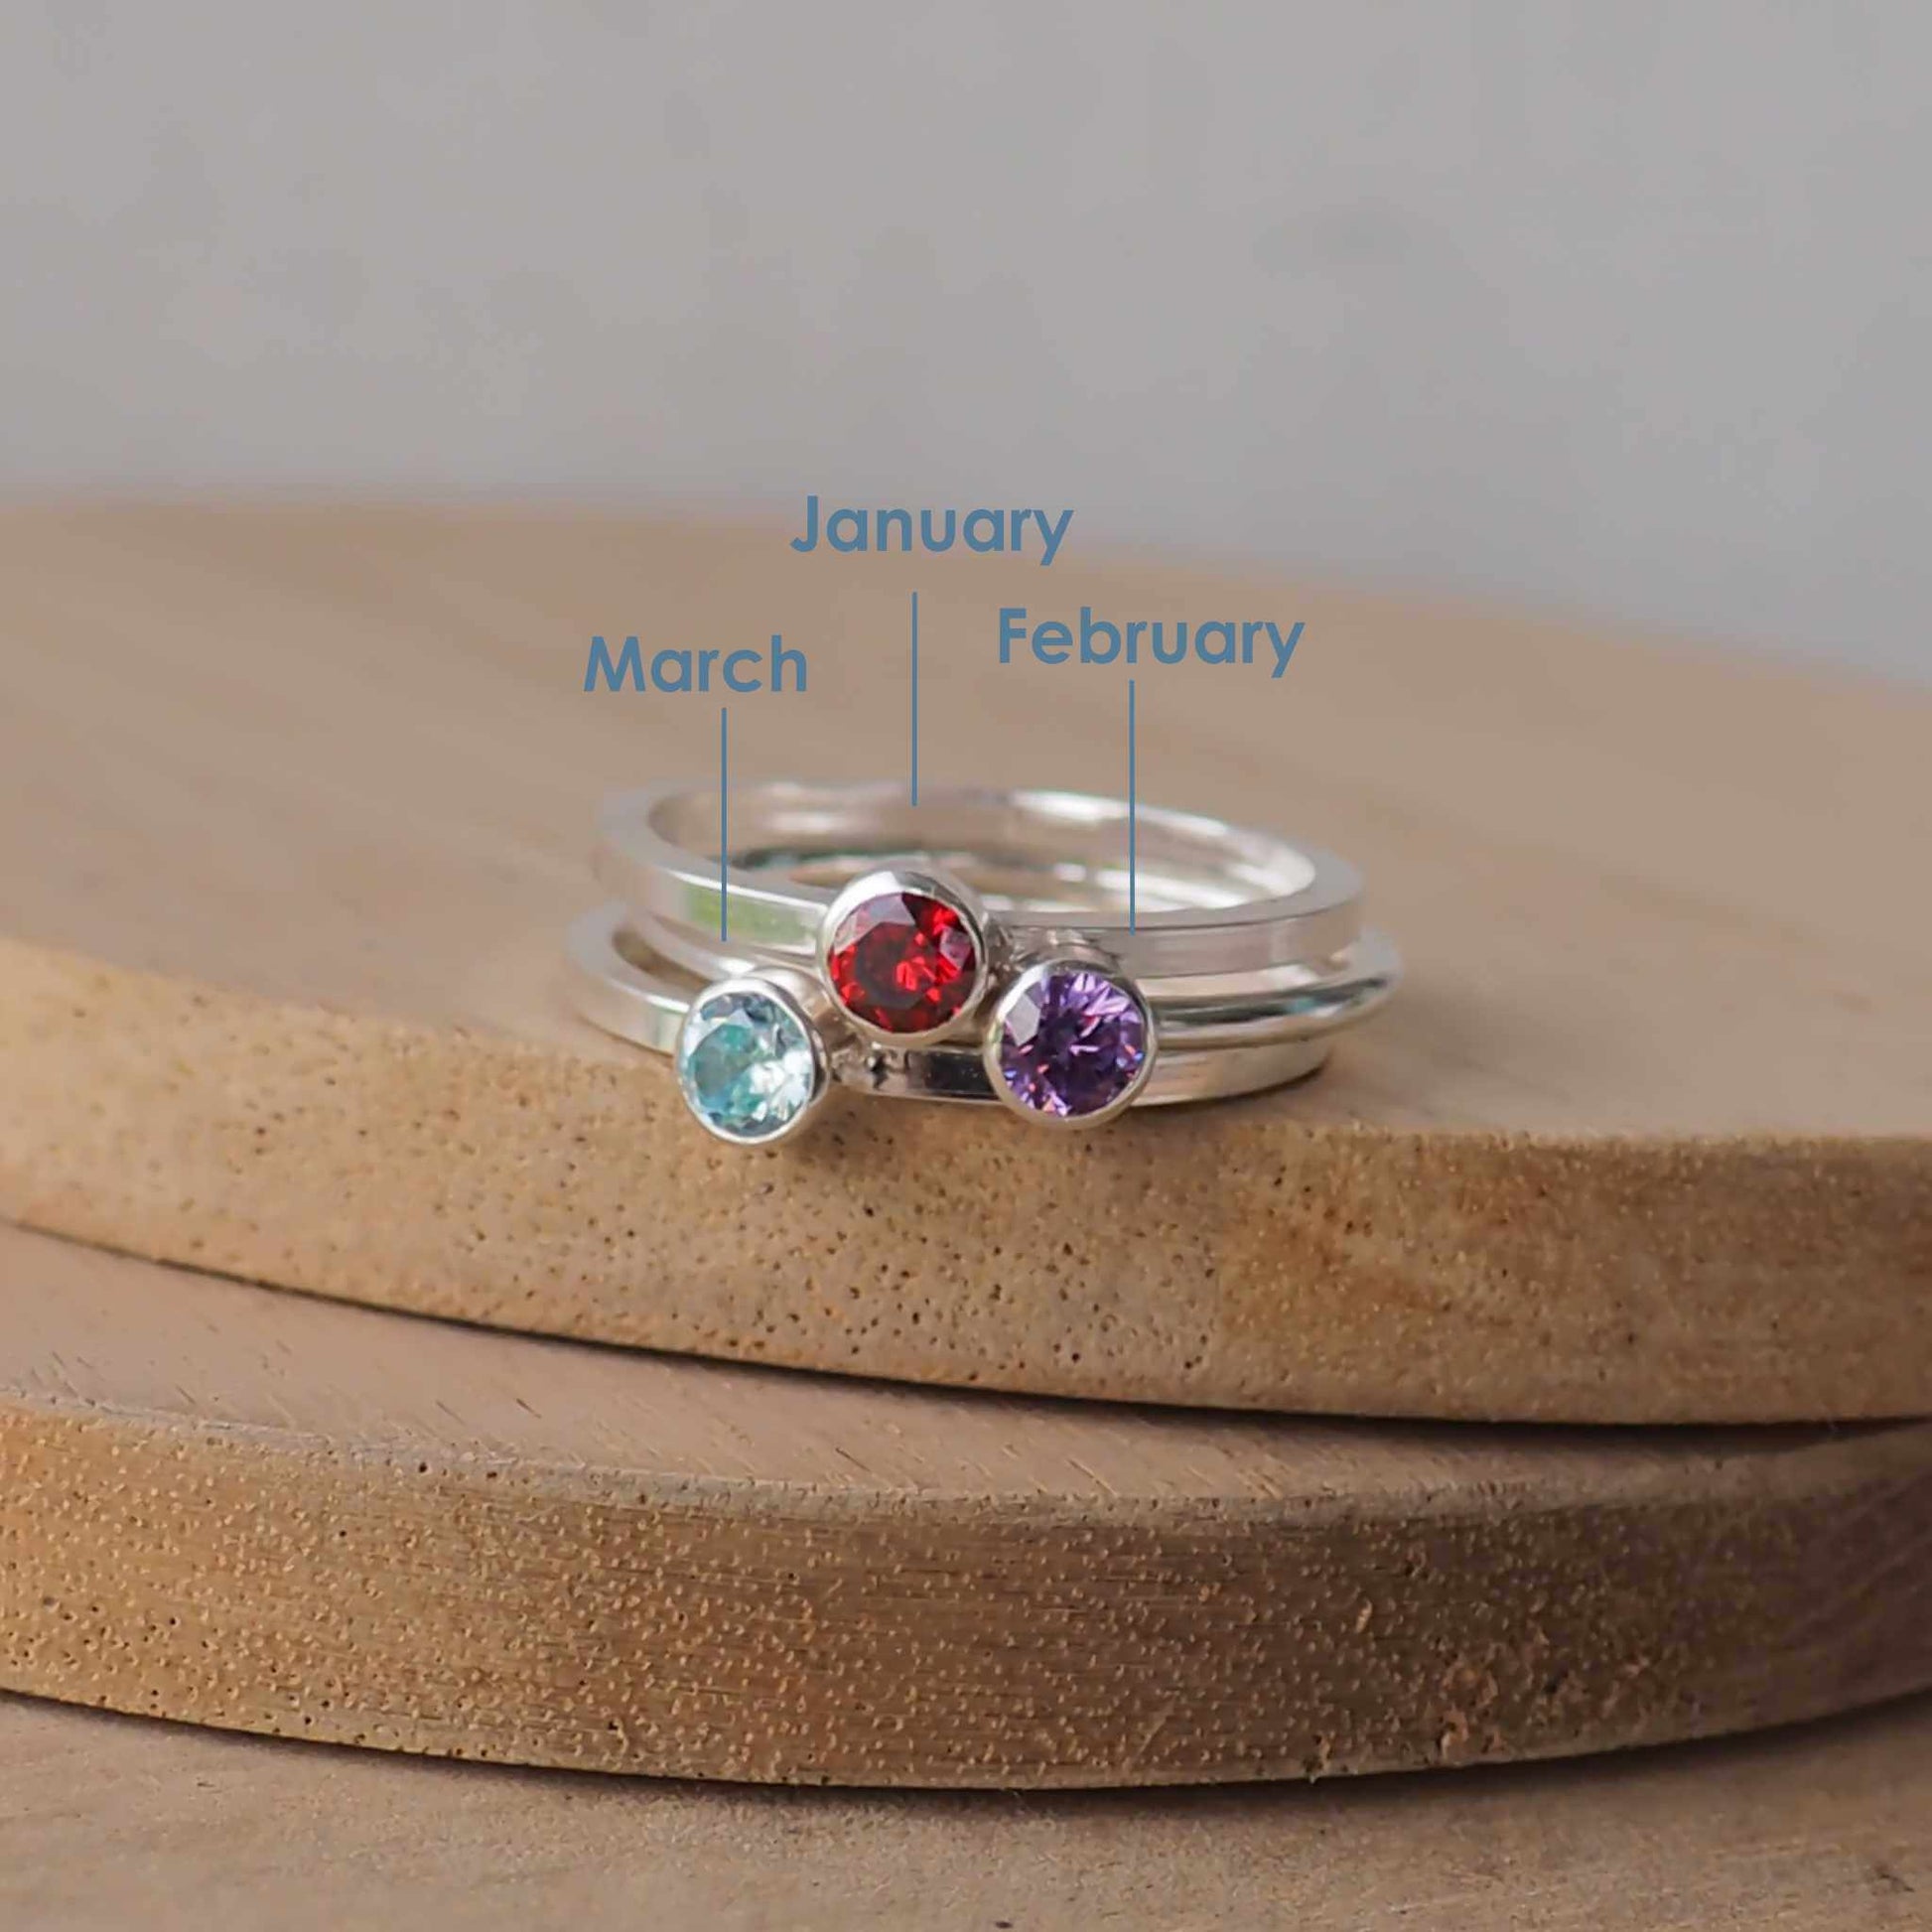 Three silver and gemstone rings with January, February and March birthstones. Silver rings with a 4 mm size stone in simple style with a red, purple and aqua gemstone. Handmade in Scotland by Maram Jewellery